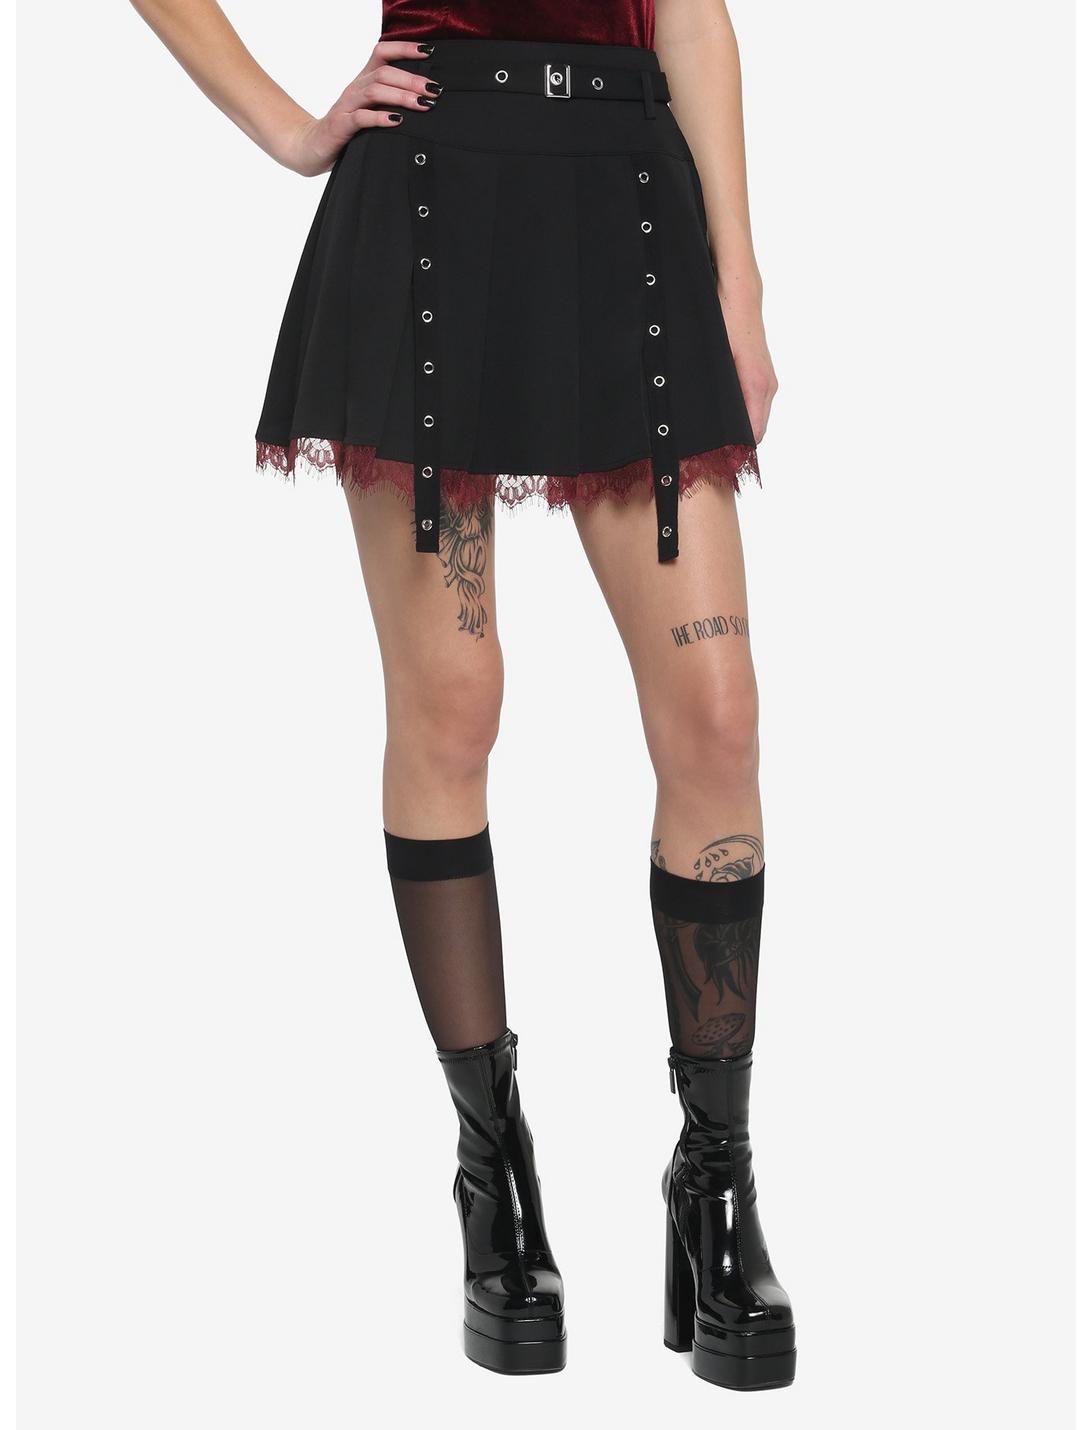 Black Lace Trim & Grommets Pleated Skirt | Hot Topic